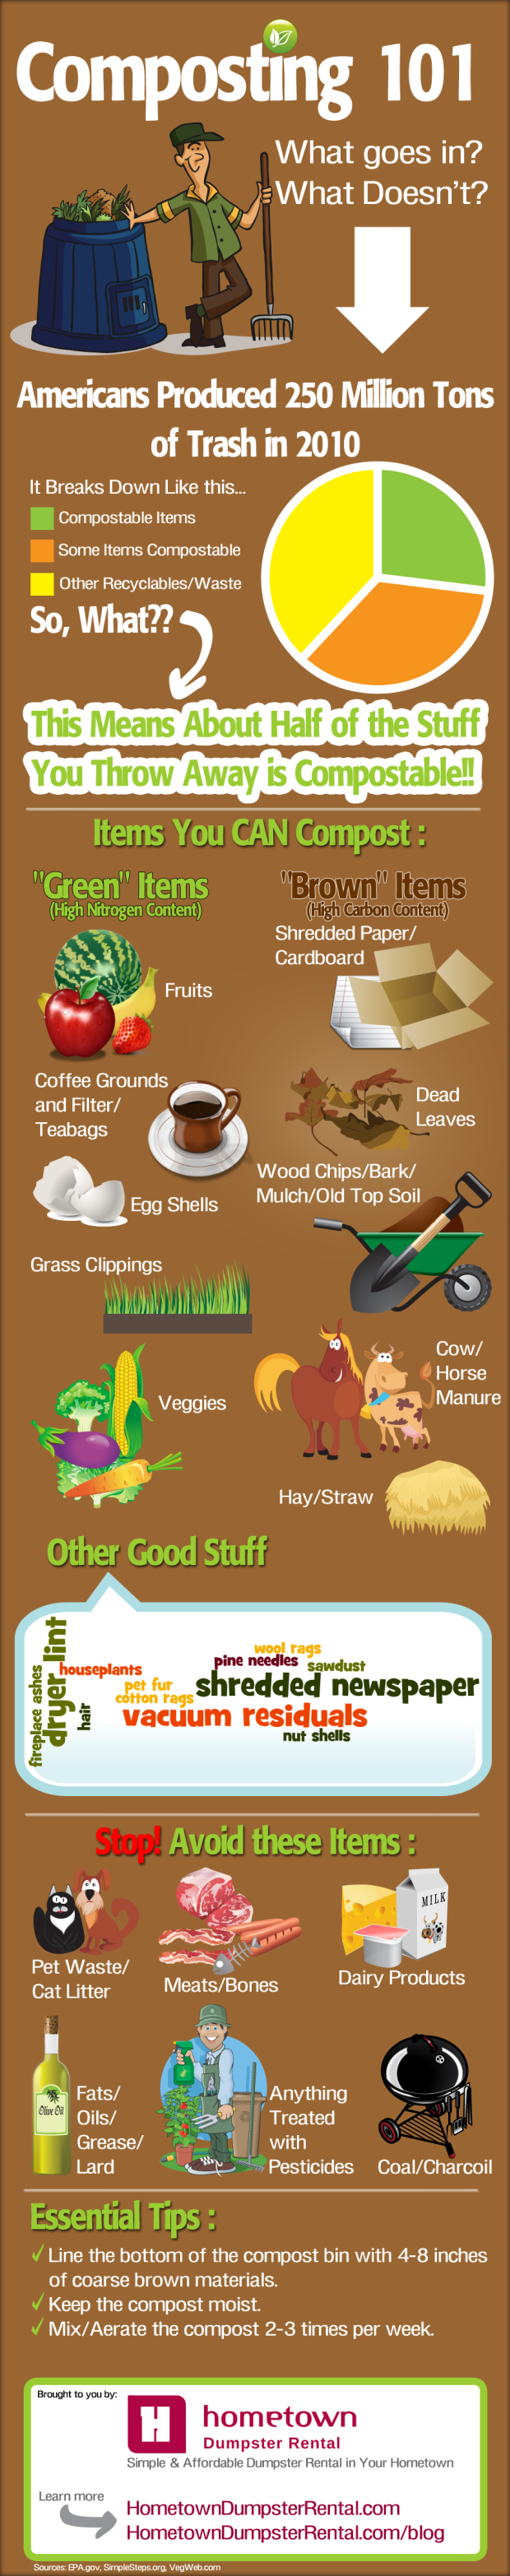 Composting 101 Infographic